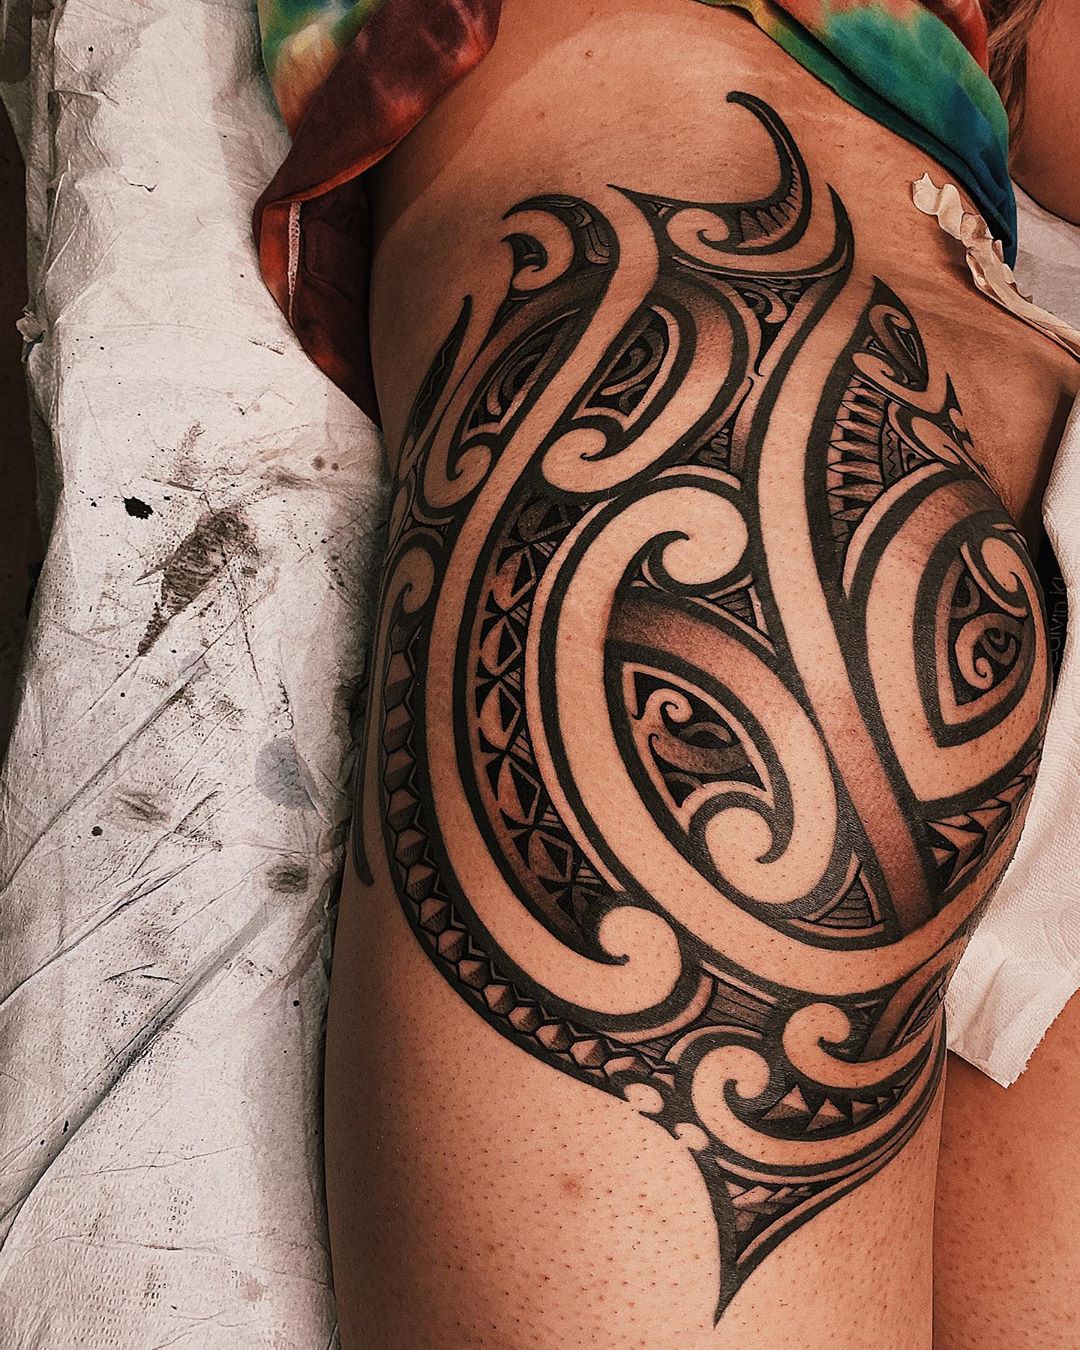 TRIBAL TATTOOS history meanings and popular designs of this body patterns